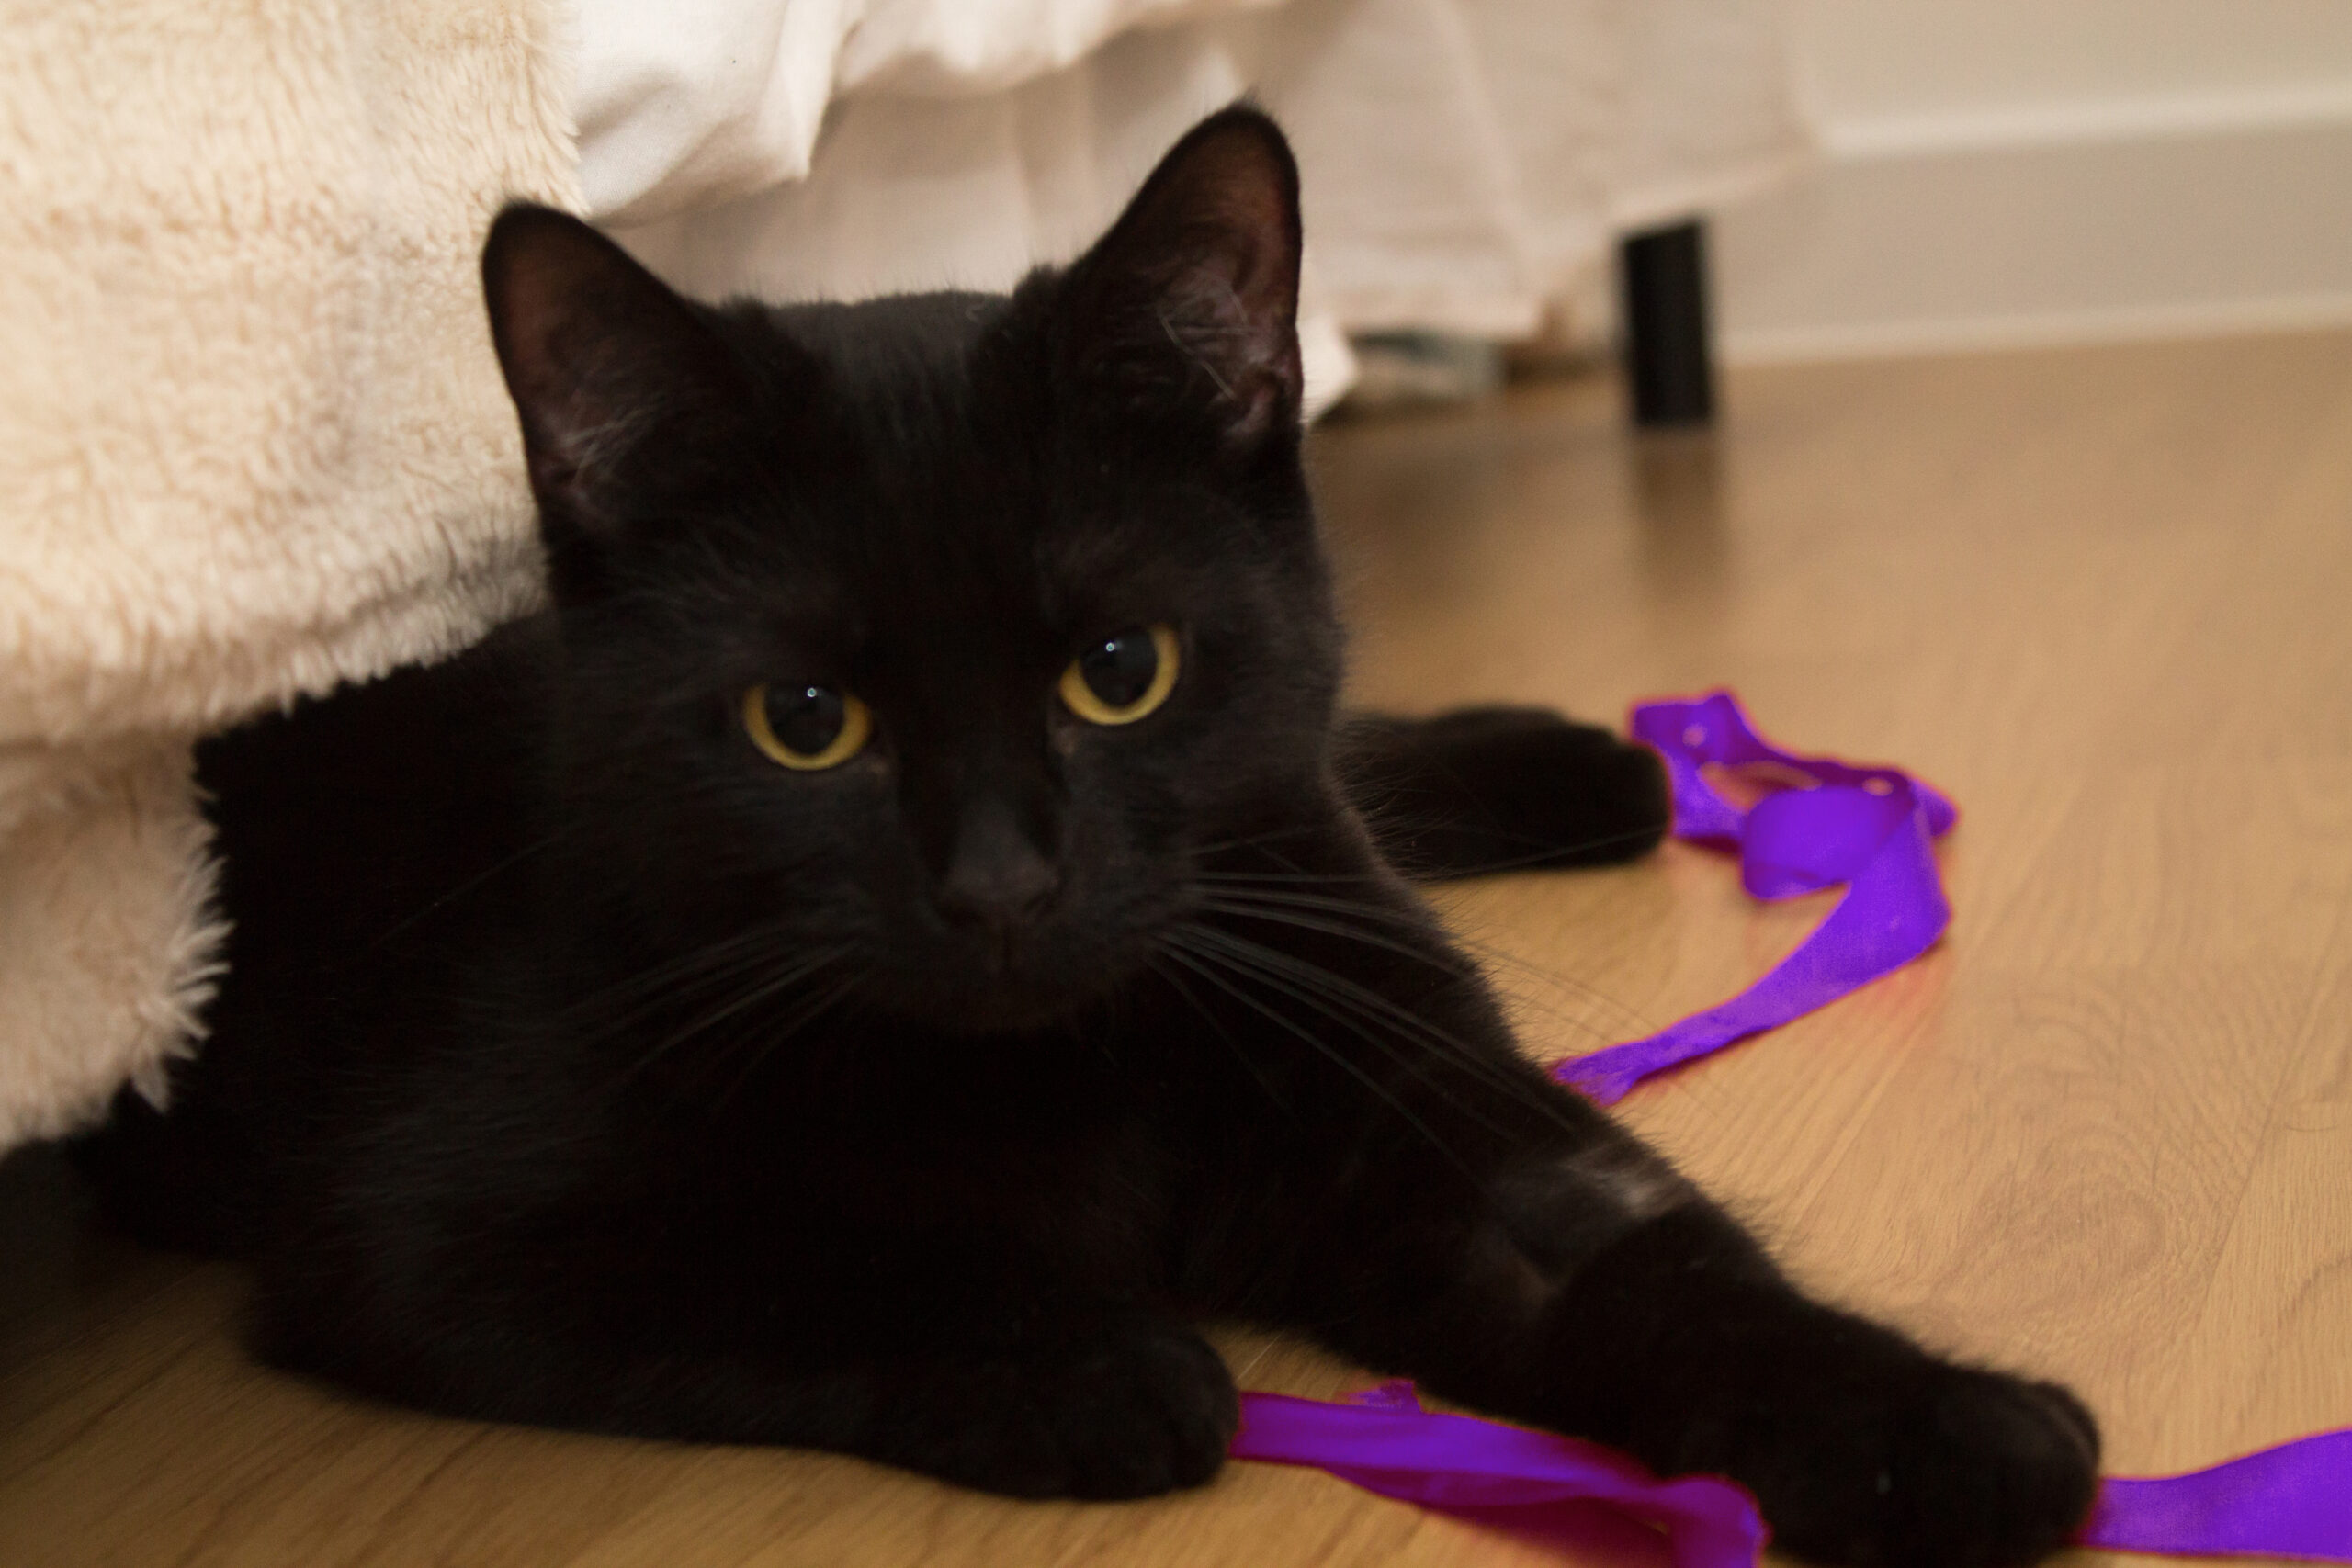 Sooty poses with an appropriately branded ribbon.